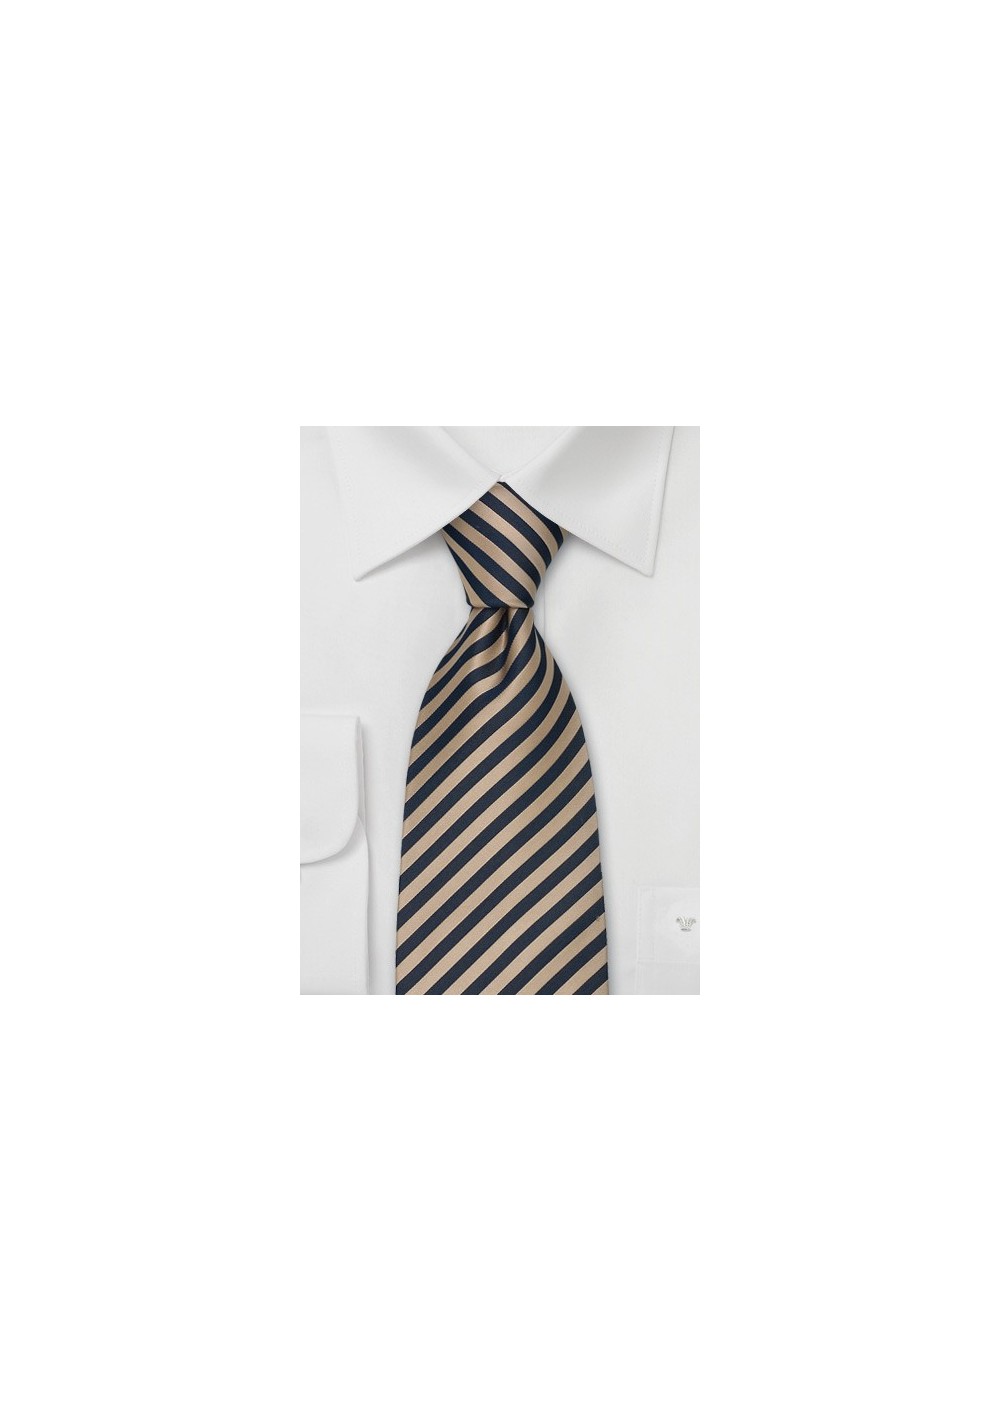 Narrow Striped Ties - Striped Necktie "Signals" by Parsely